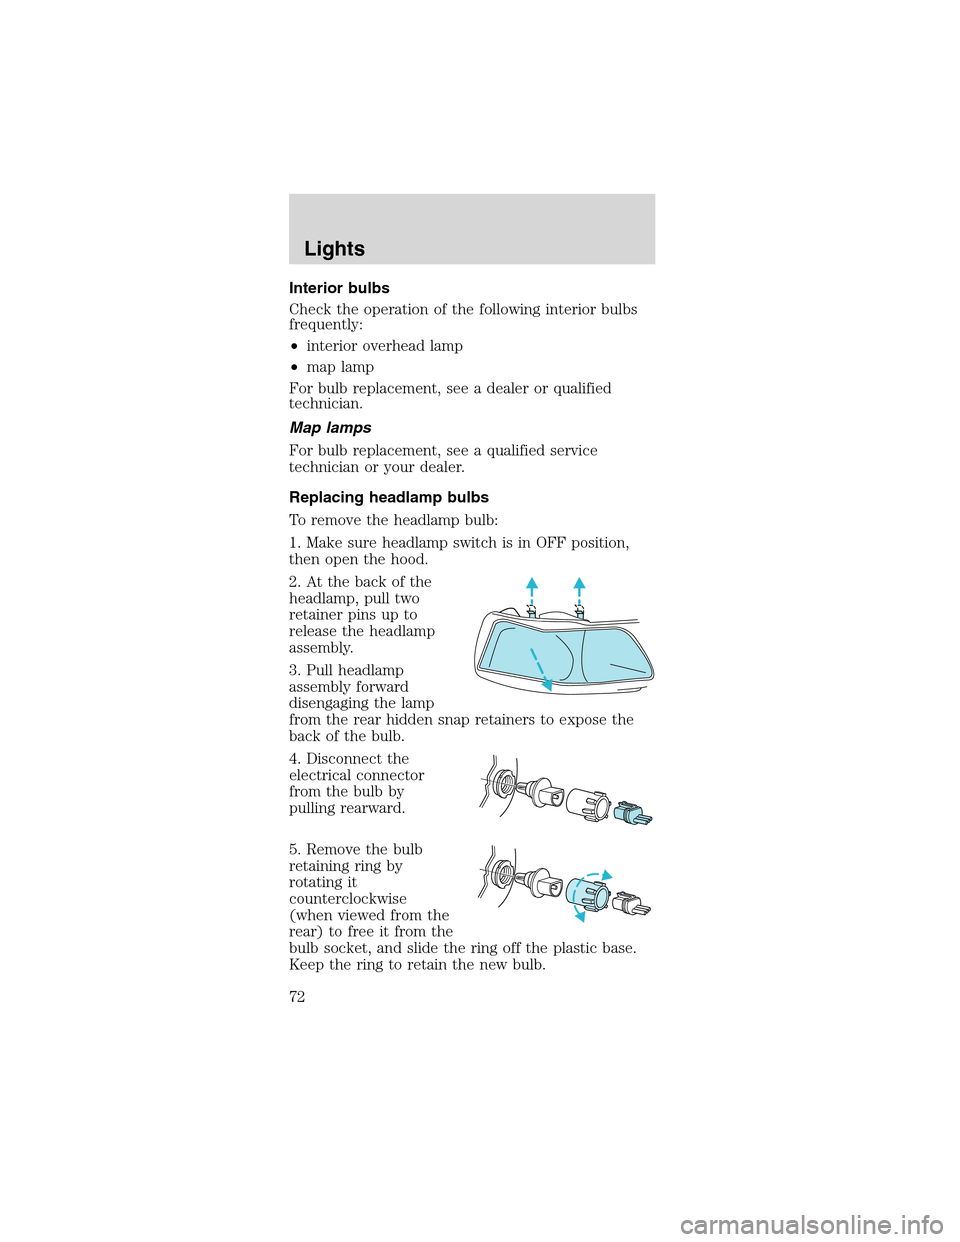 FORD MUSTANG 2003 4.G Owners Manual Interior bulbs
Check the operation of the following interior bulbs
frequently:
•interior overhead lamp
•map lamp
For bulb replacement, see a dealer or qualified
technician.
Map lamps
For bulb repl